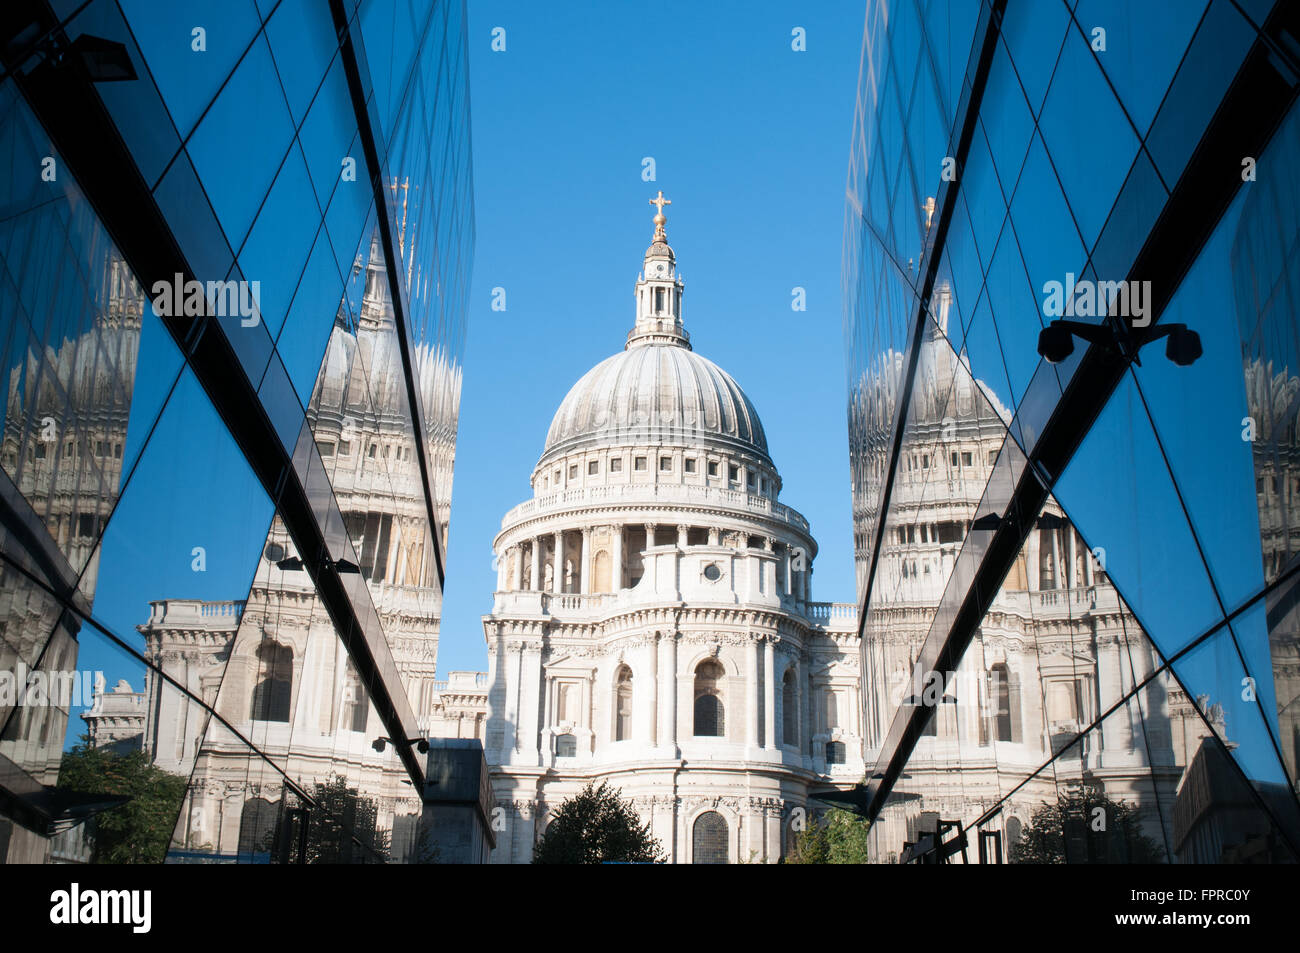 One New Change building owned by Land Securities in St.Paul's London England. Reflection of St.Paul's  on building. Stock Photo